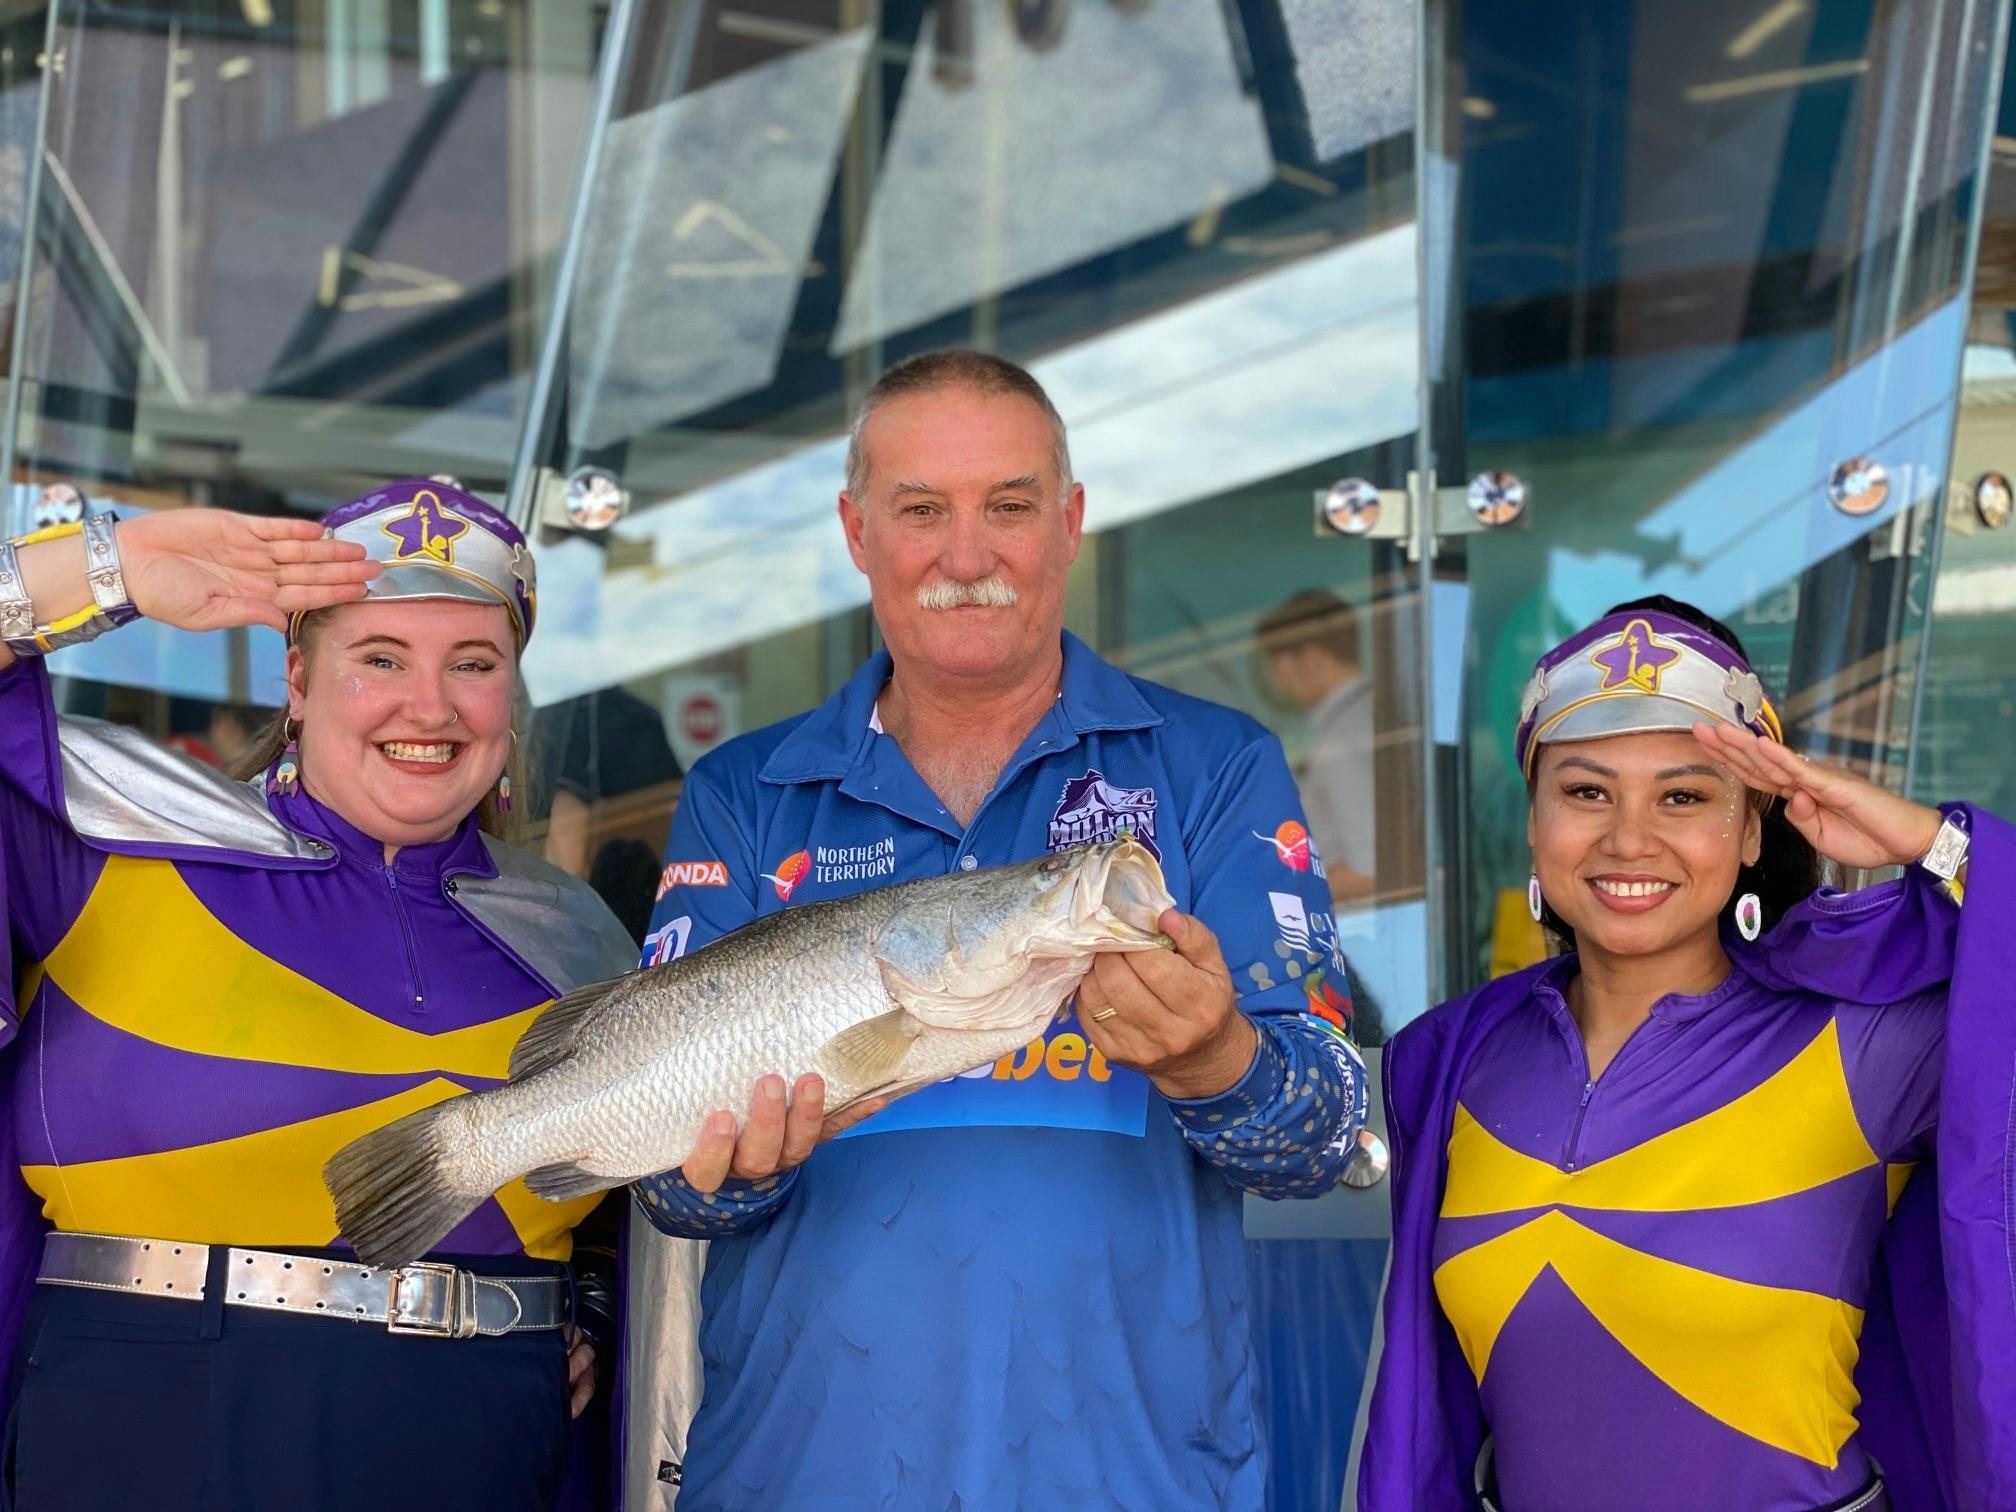 Tony McLean poses with two Captain Starlights and his winning barra